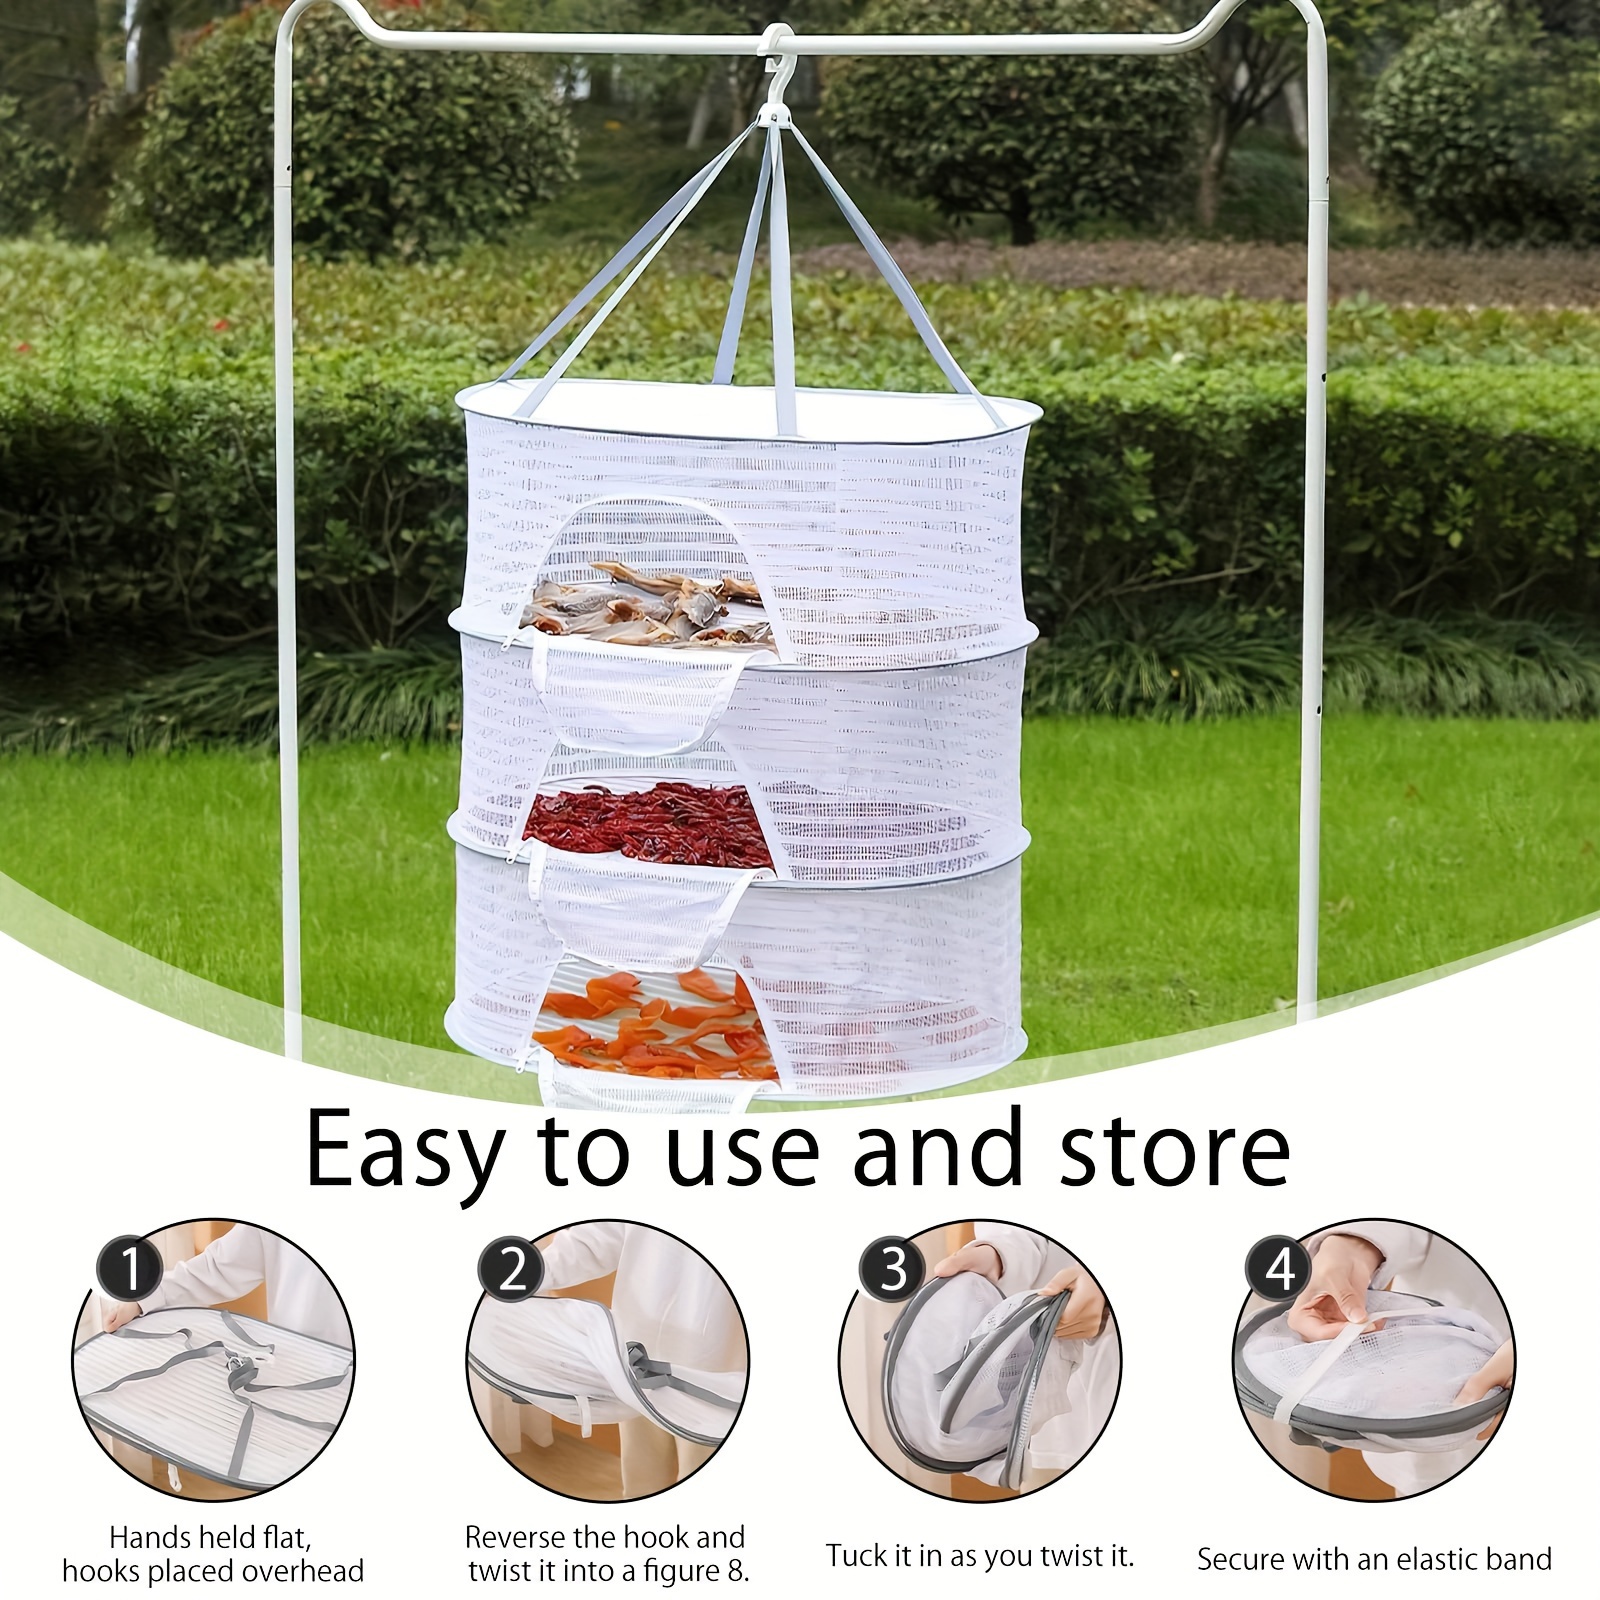 

Foldable Mesh Drying Rack With Windproof Hook - Fabric Wall Mount Clothes Dryer Basket, 3 Layers Hanging Mesh Dryer With Smooth Zipper And Fine Edgebanding